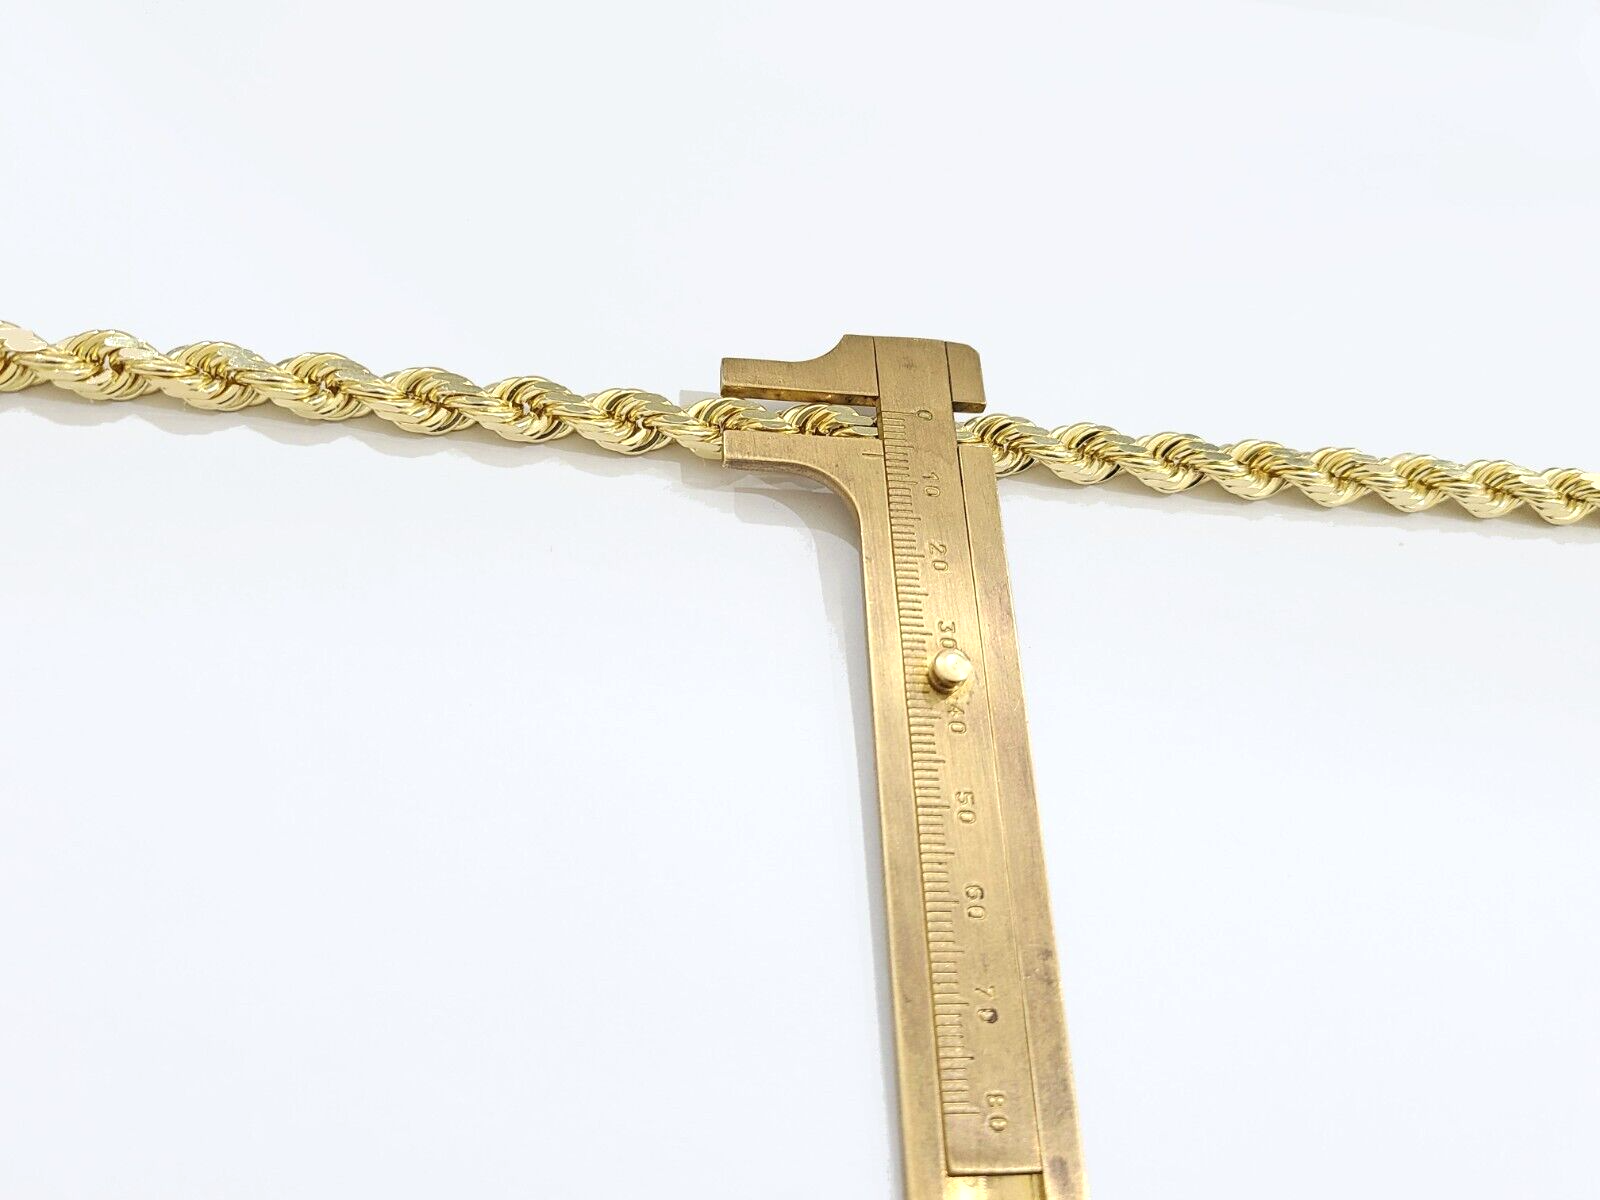 14K Real Solid Yellow Gold Necklace Rope Chain 7mm 24 inch 14kt Chain Unisex